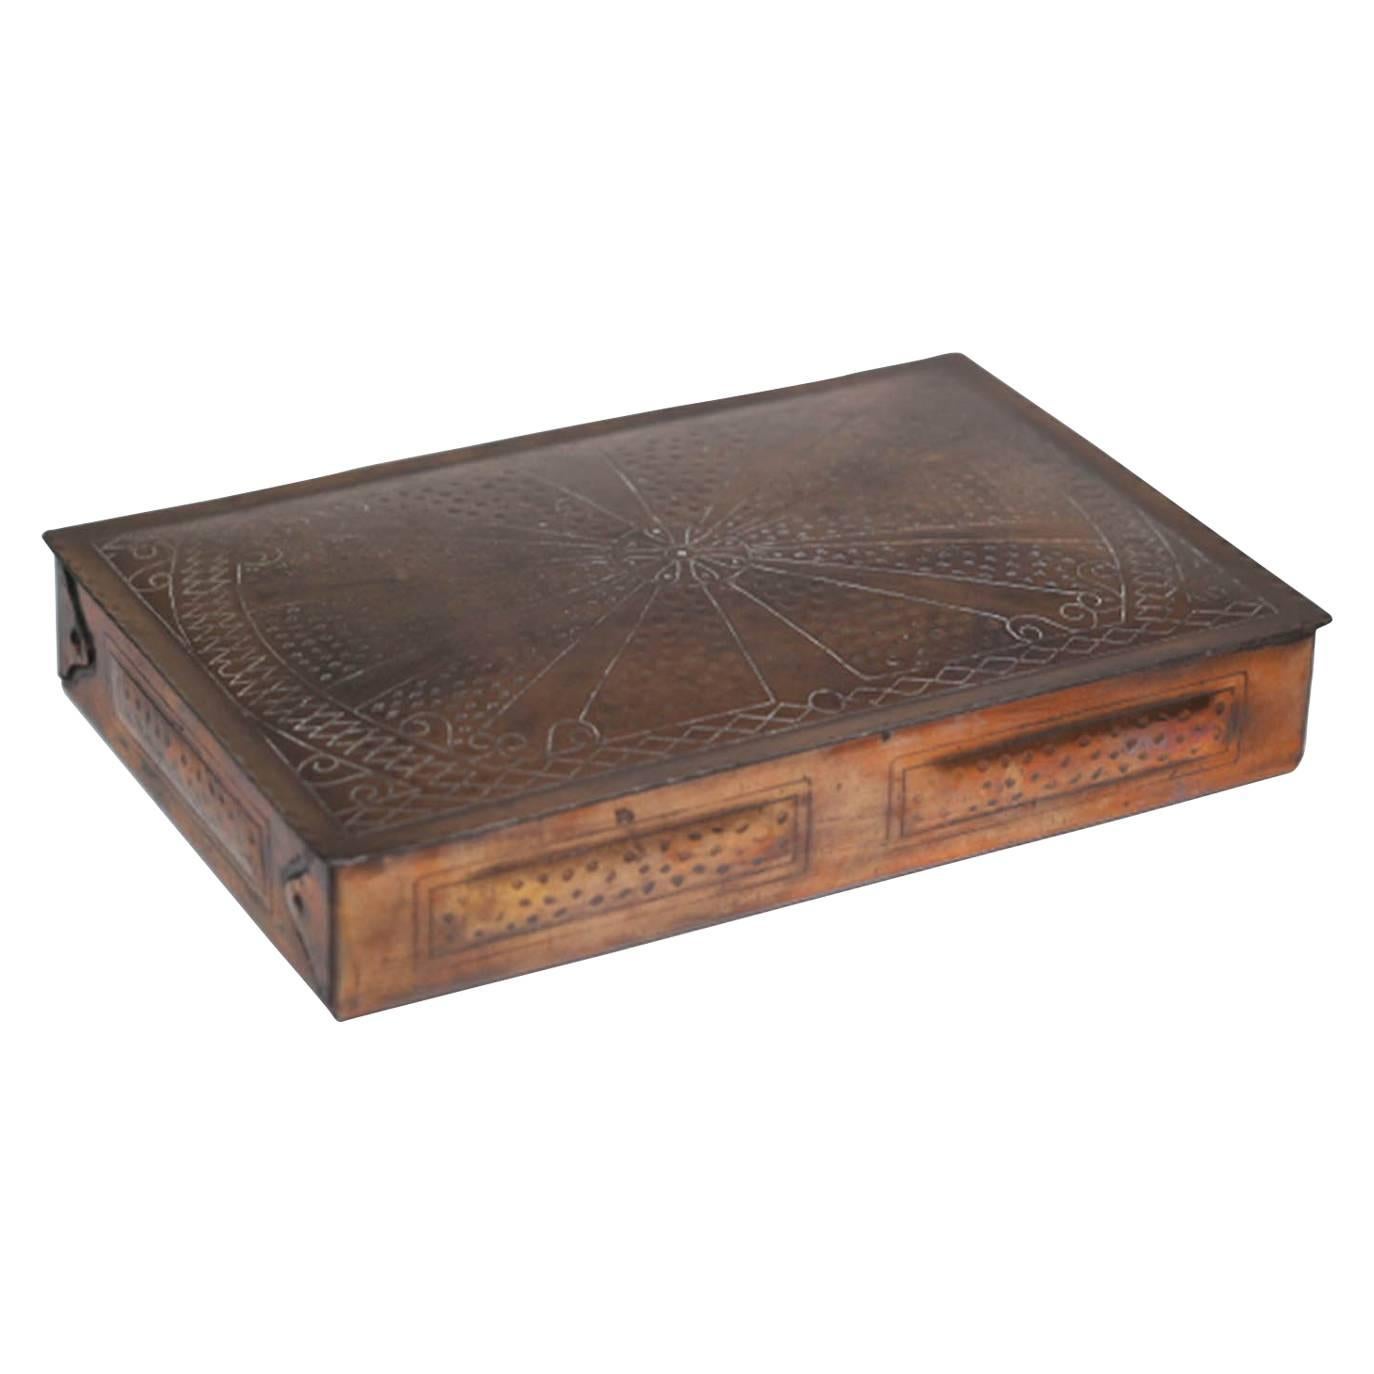 Early 20th Century Copper Plated Box